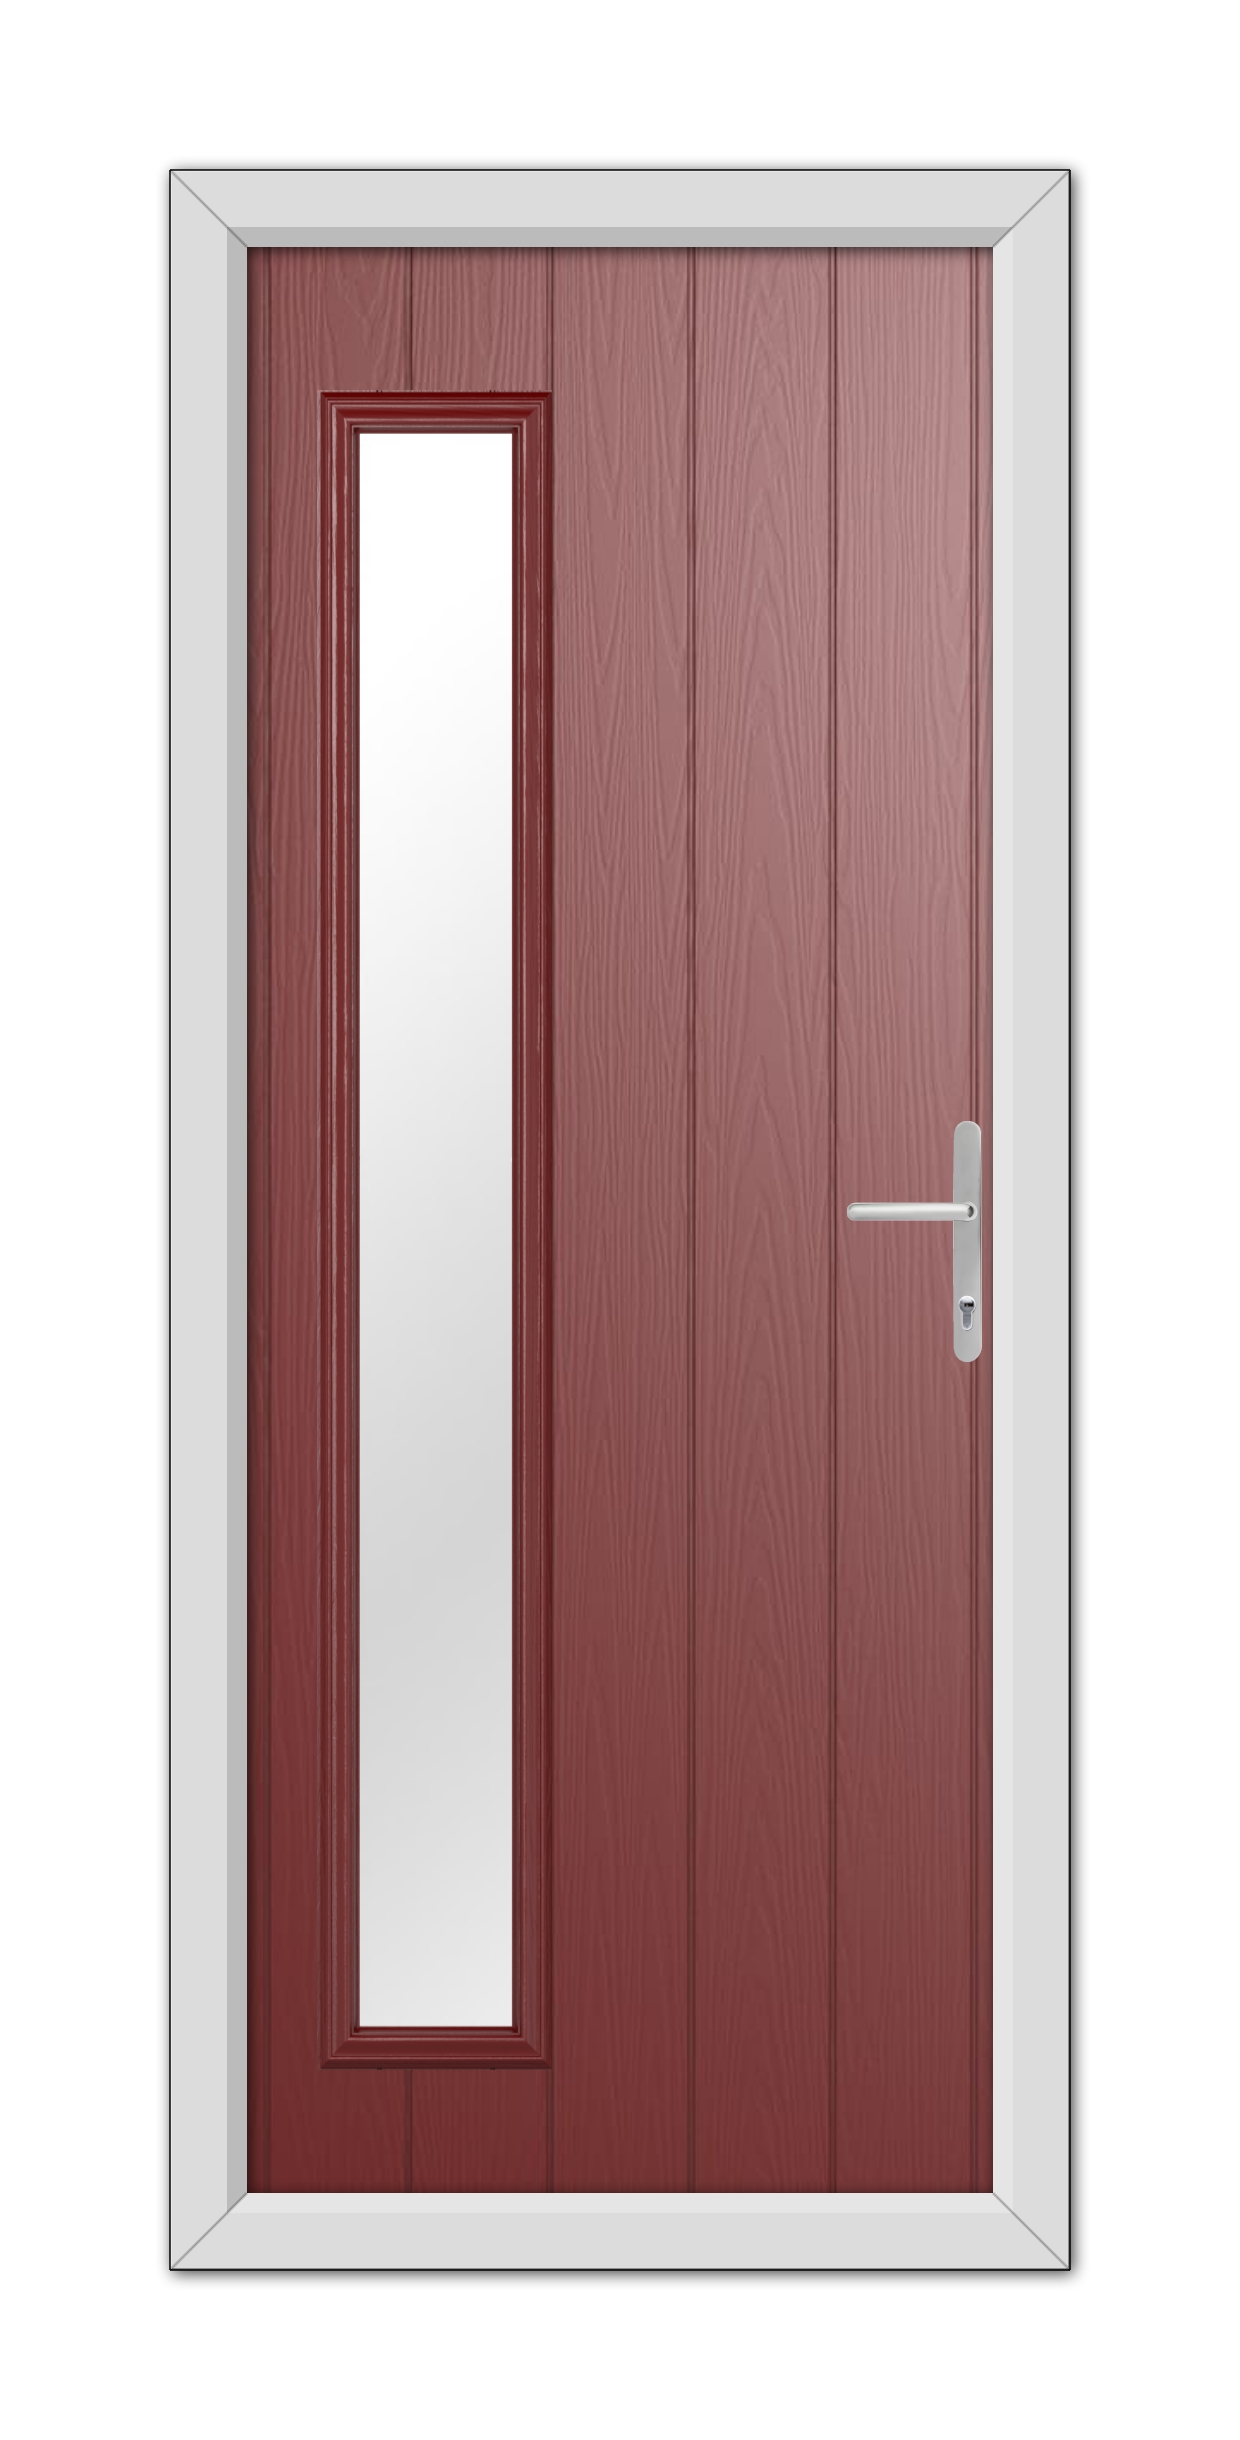 A modern Red Sutherland Composite Door 48mm Timber Core with a vertical glass panel and a white metal handle, set within a white frame.